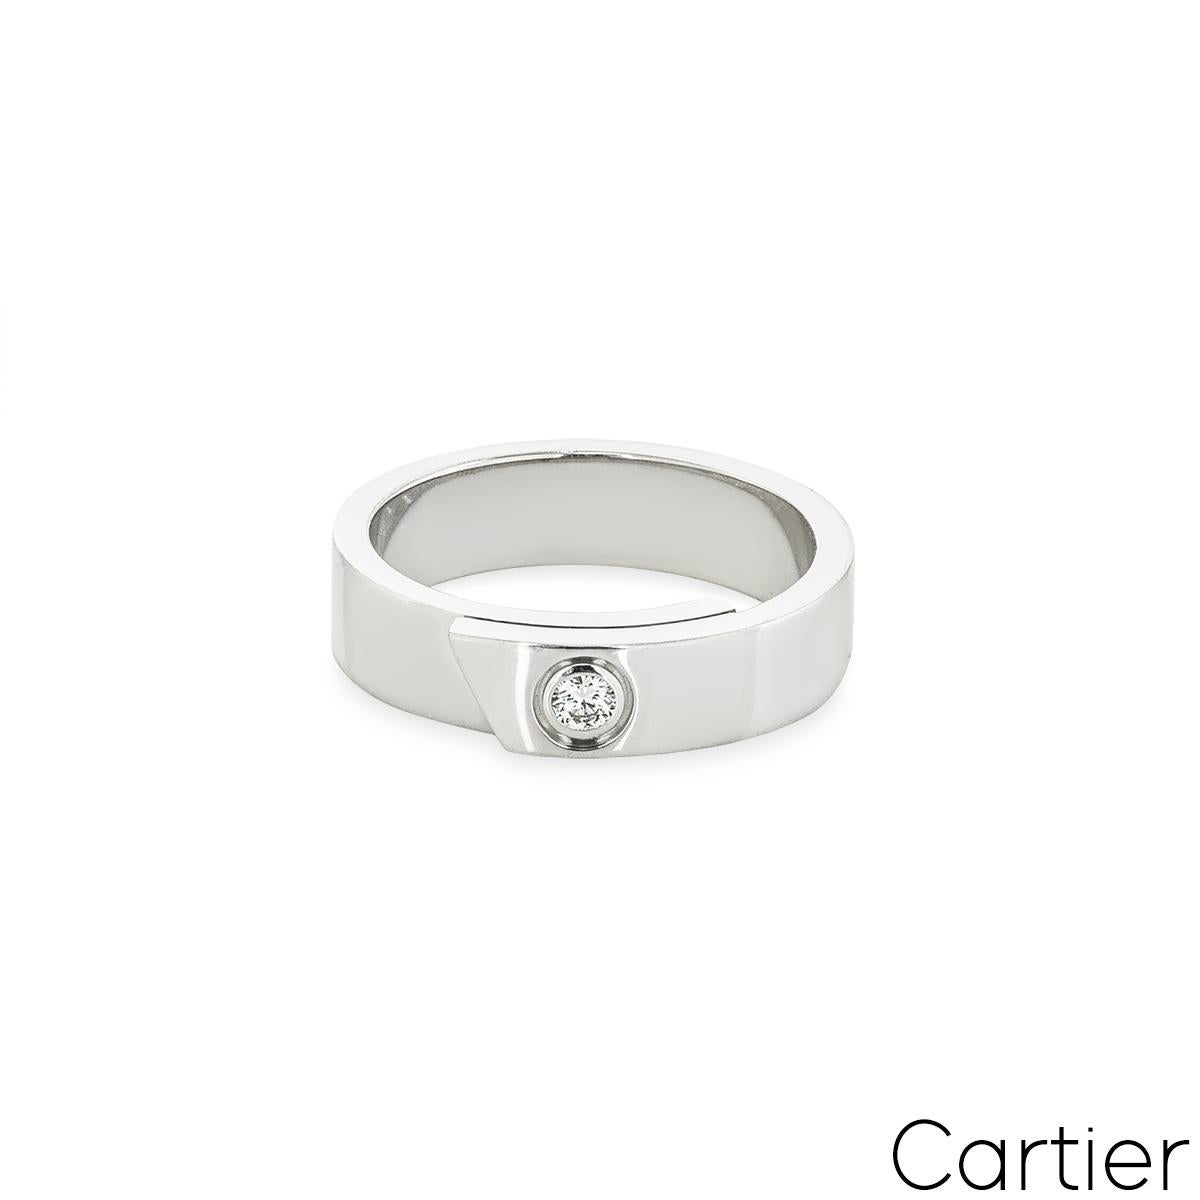 Cartier White Gold Diamond Anniversary Ring Size 60 In Excellent Condition For Sale In London, GB